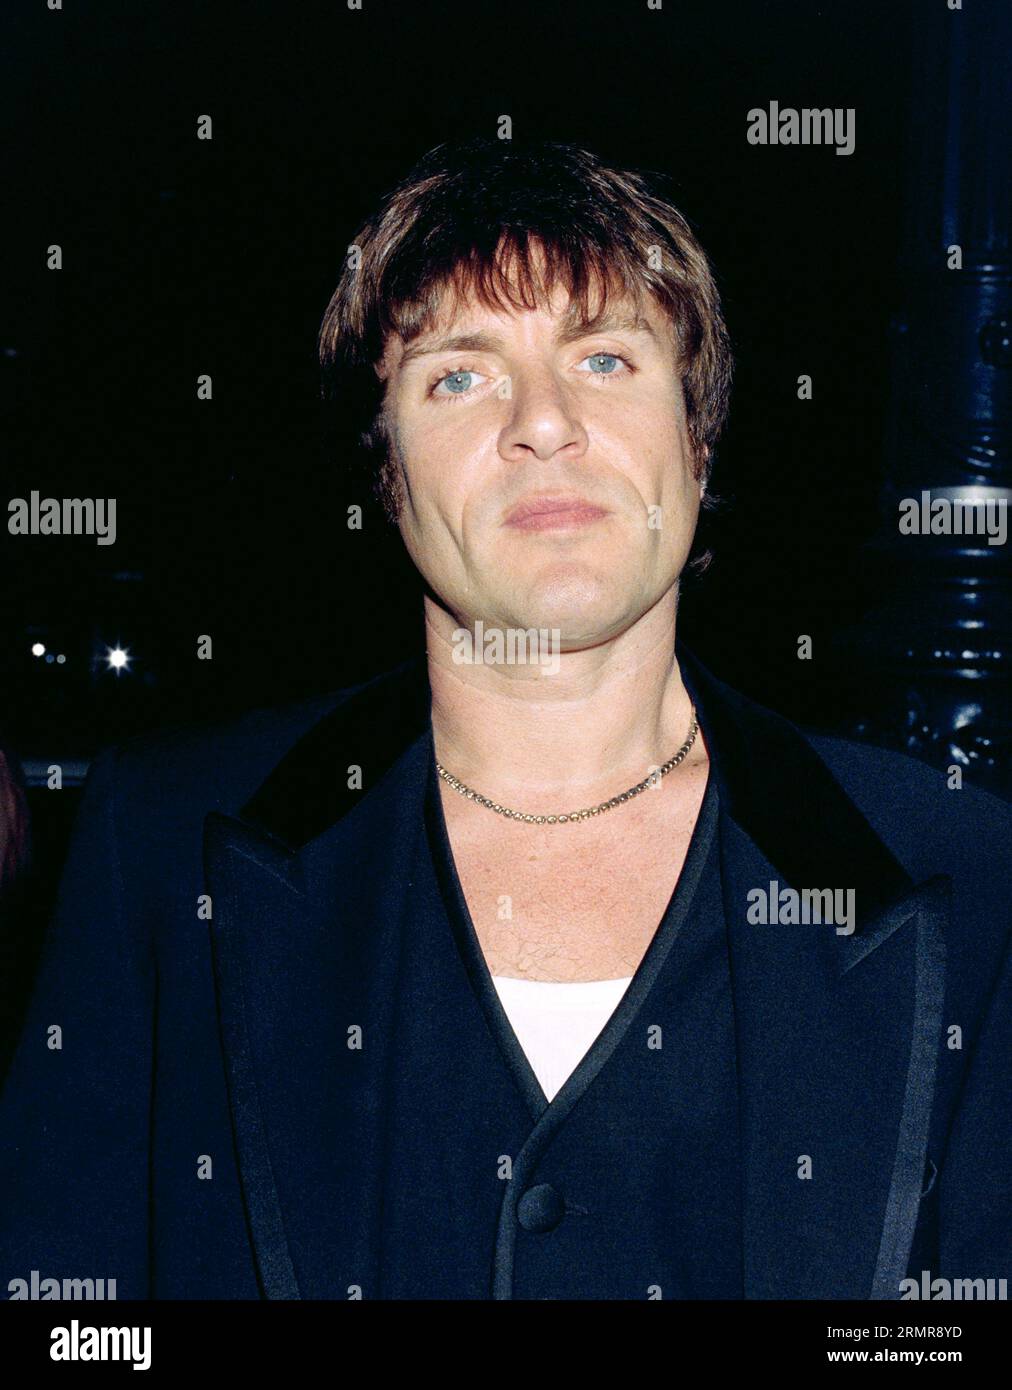 LOS ANGELES, CA. April 3, 1997: Pop star Simon Le Bon at the premiere of “The Saint” at the Academy of Motion Pictures Arts & Sciences. Picture: Paul Smith / Featureflash Stock Photo